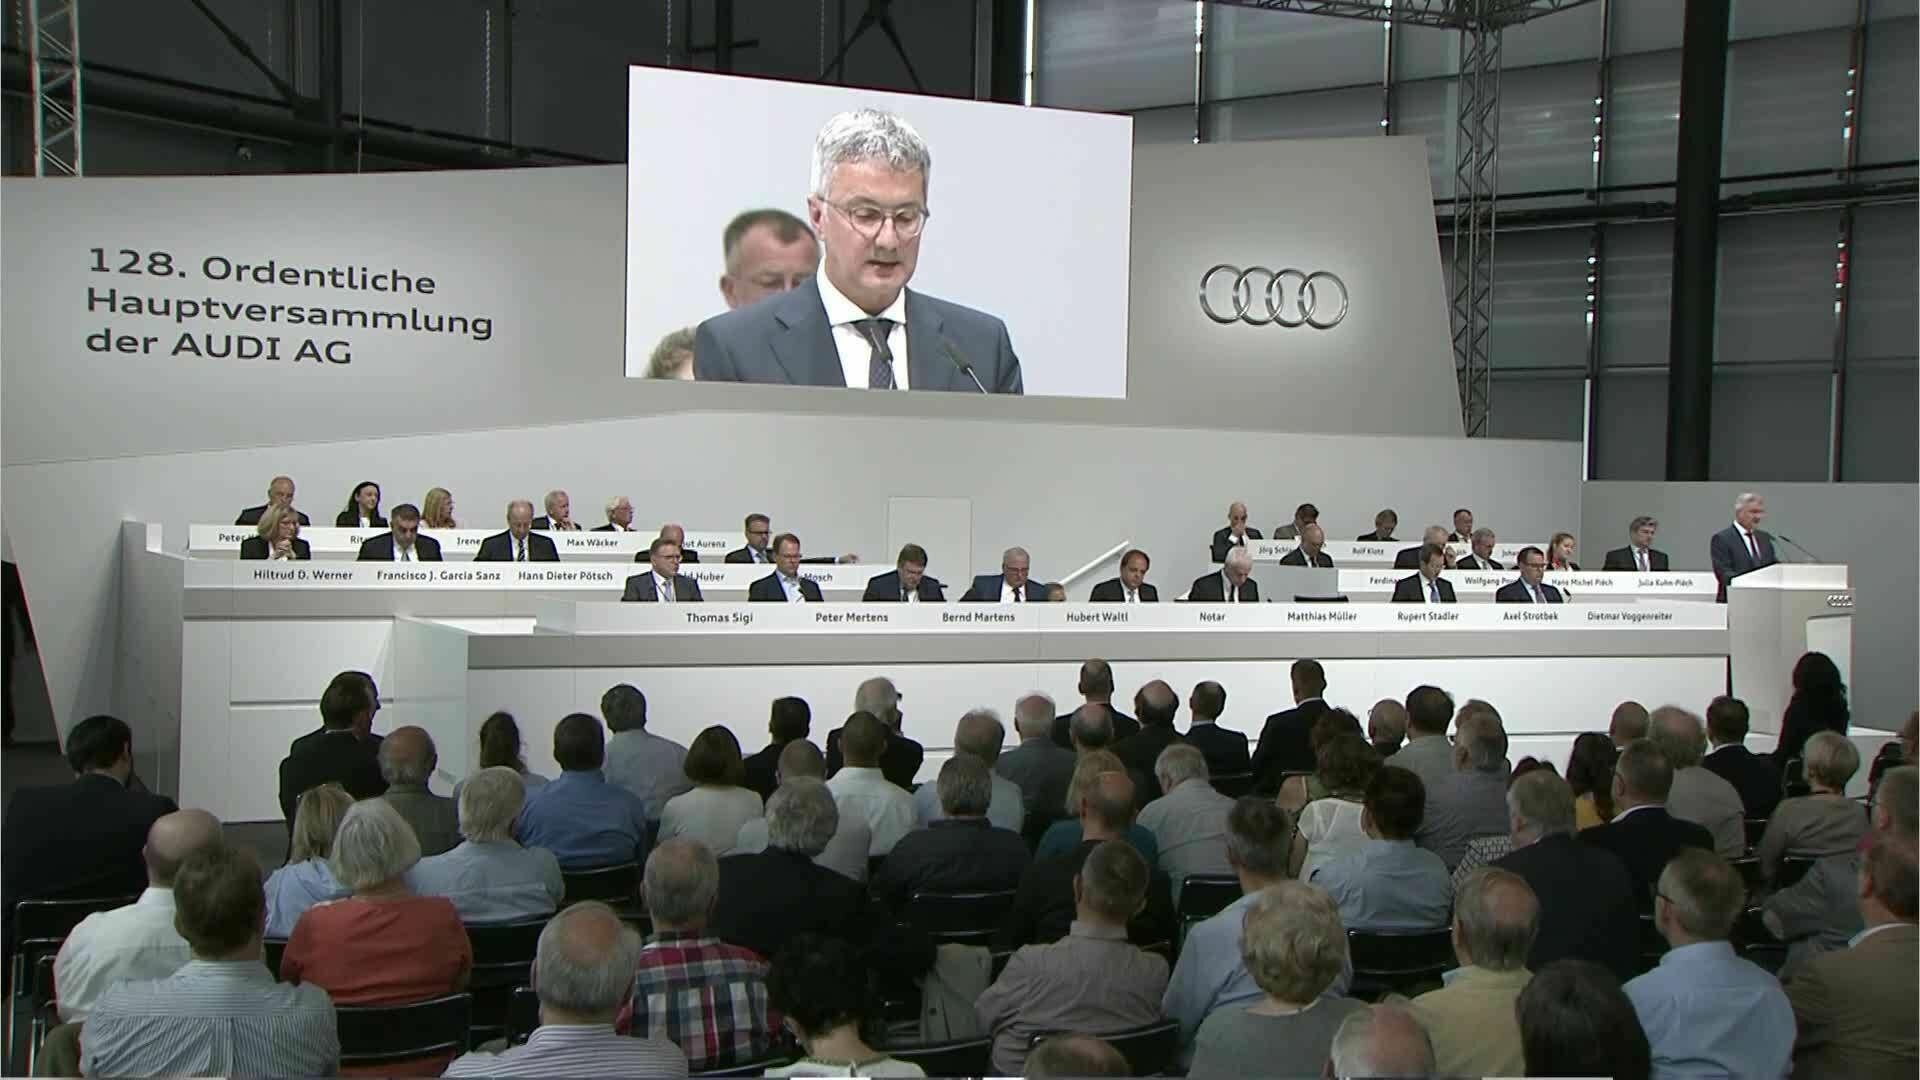 Annual General Meeting AUDI AG 2017 - The recording